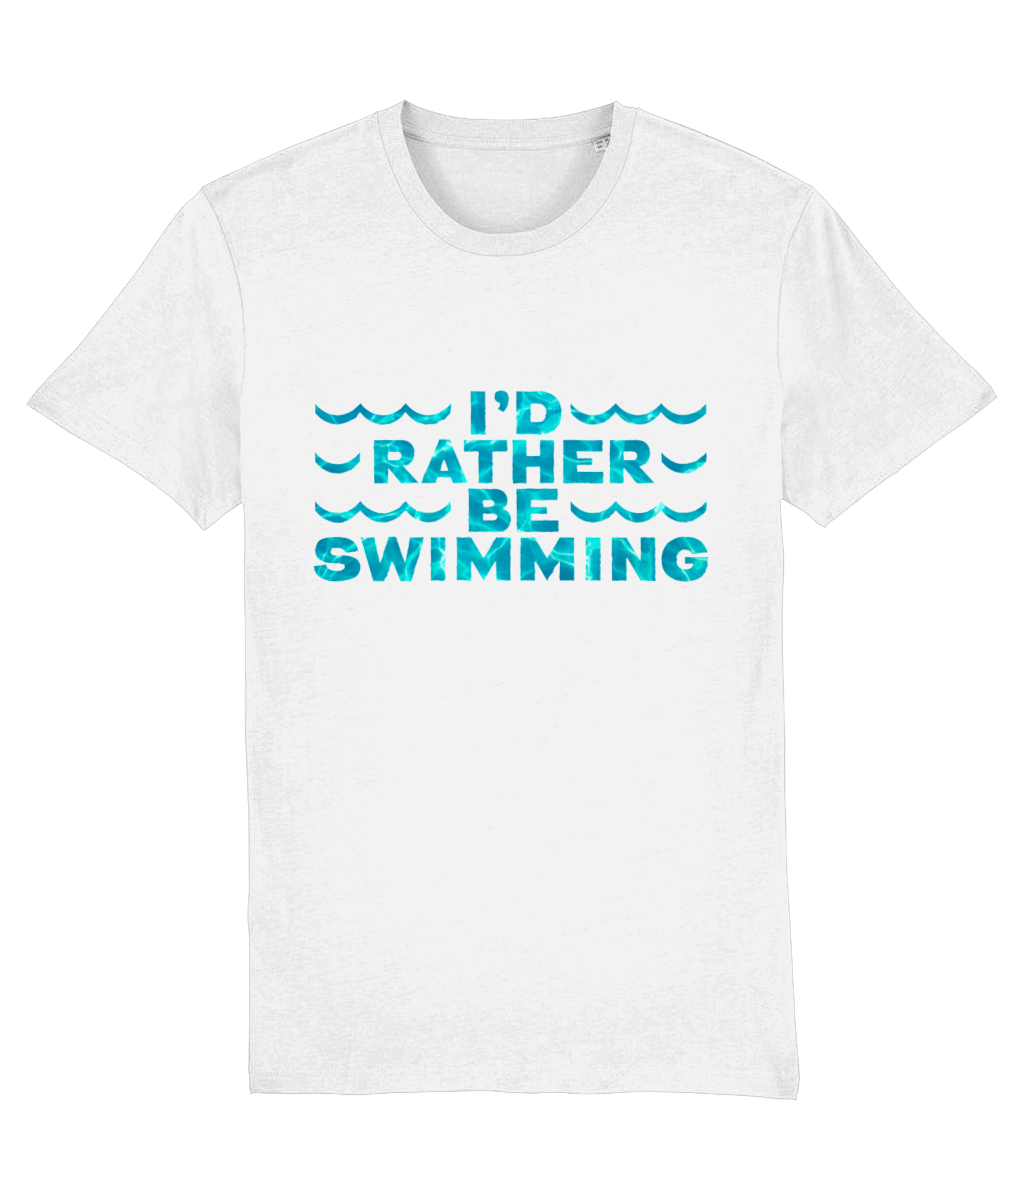 I'D RATHER BE SWIMMING - Unisex t-shirt